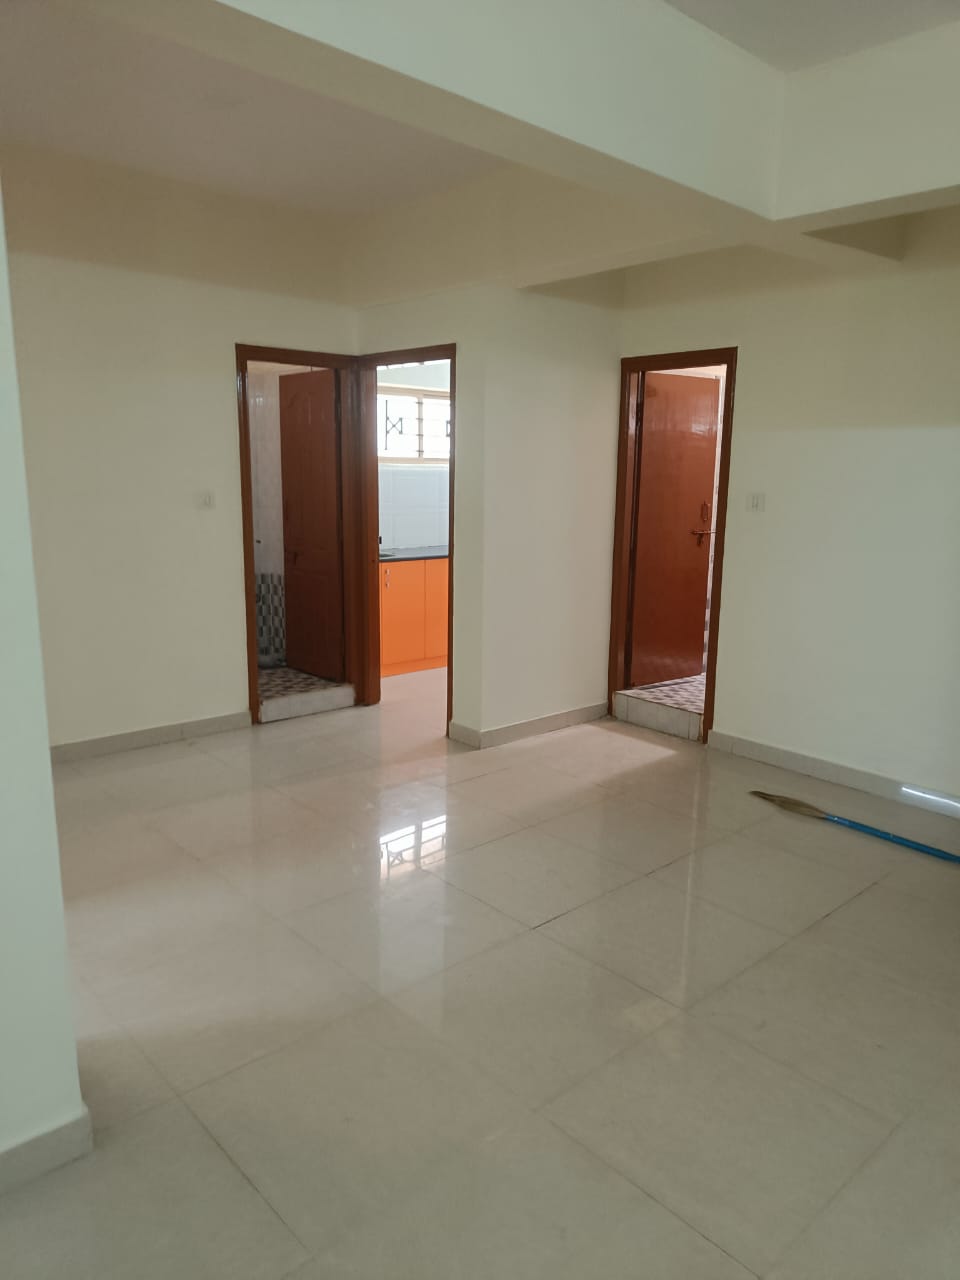 2 BHK Independent House for Lease Only at JAML2 - 4050 in Peenya